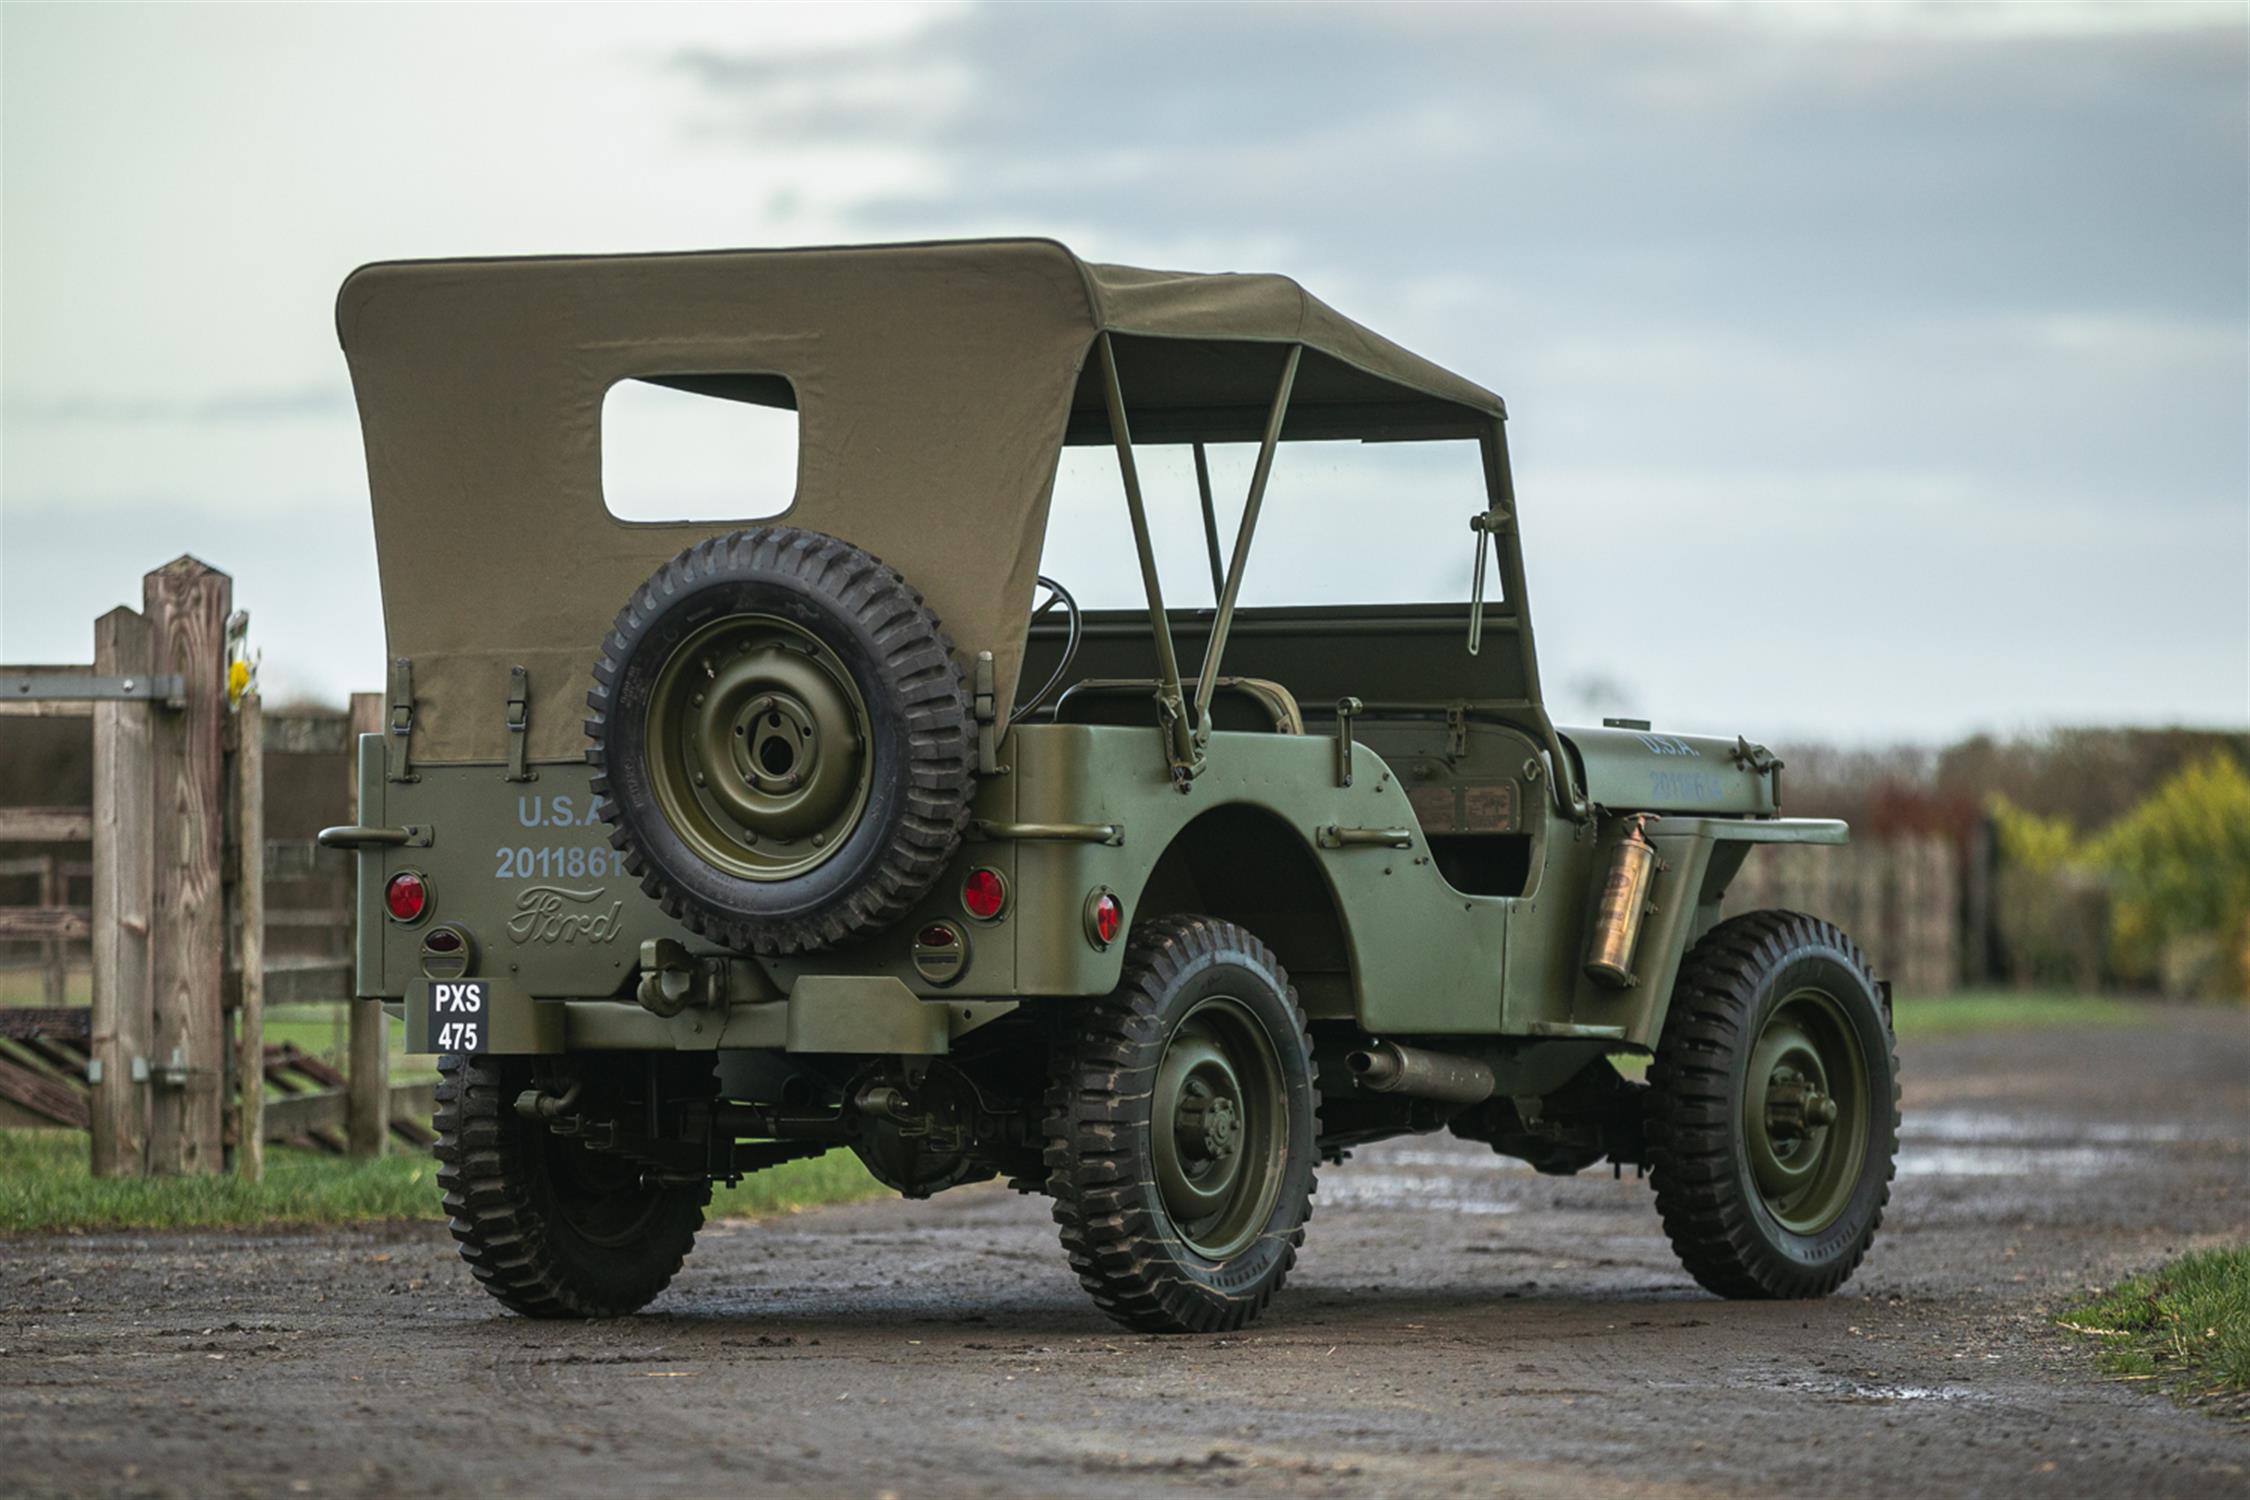 1942 Ford GPW Jeep - King George VI - Image 4 of 10